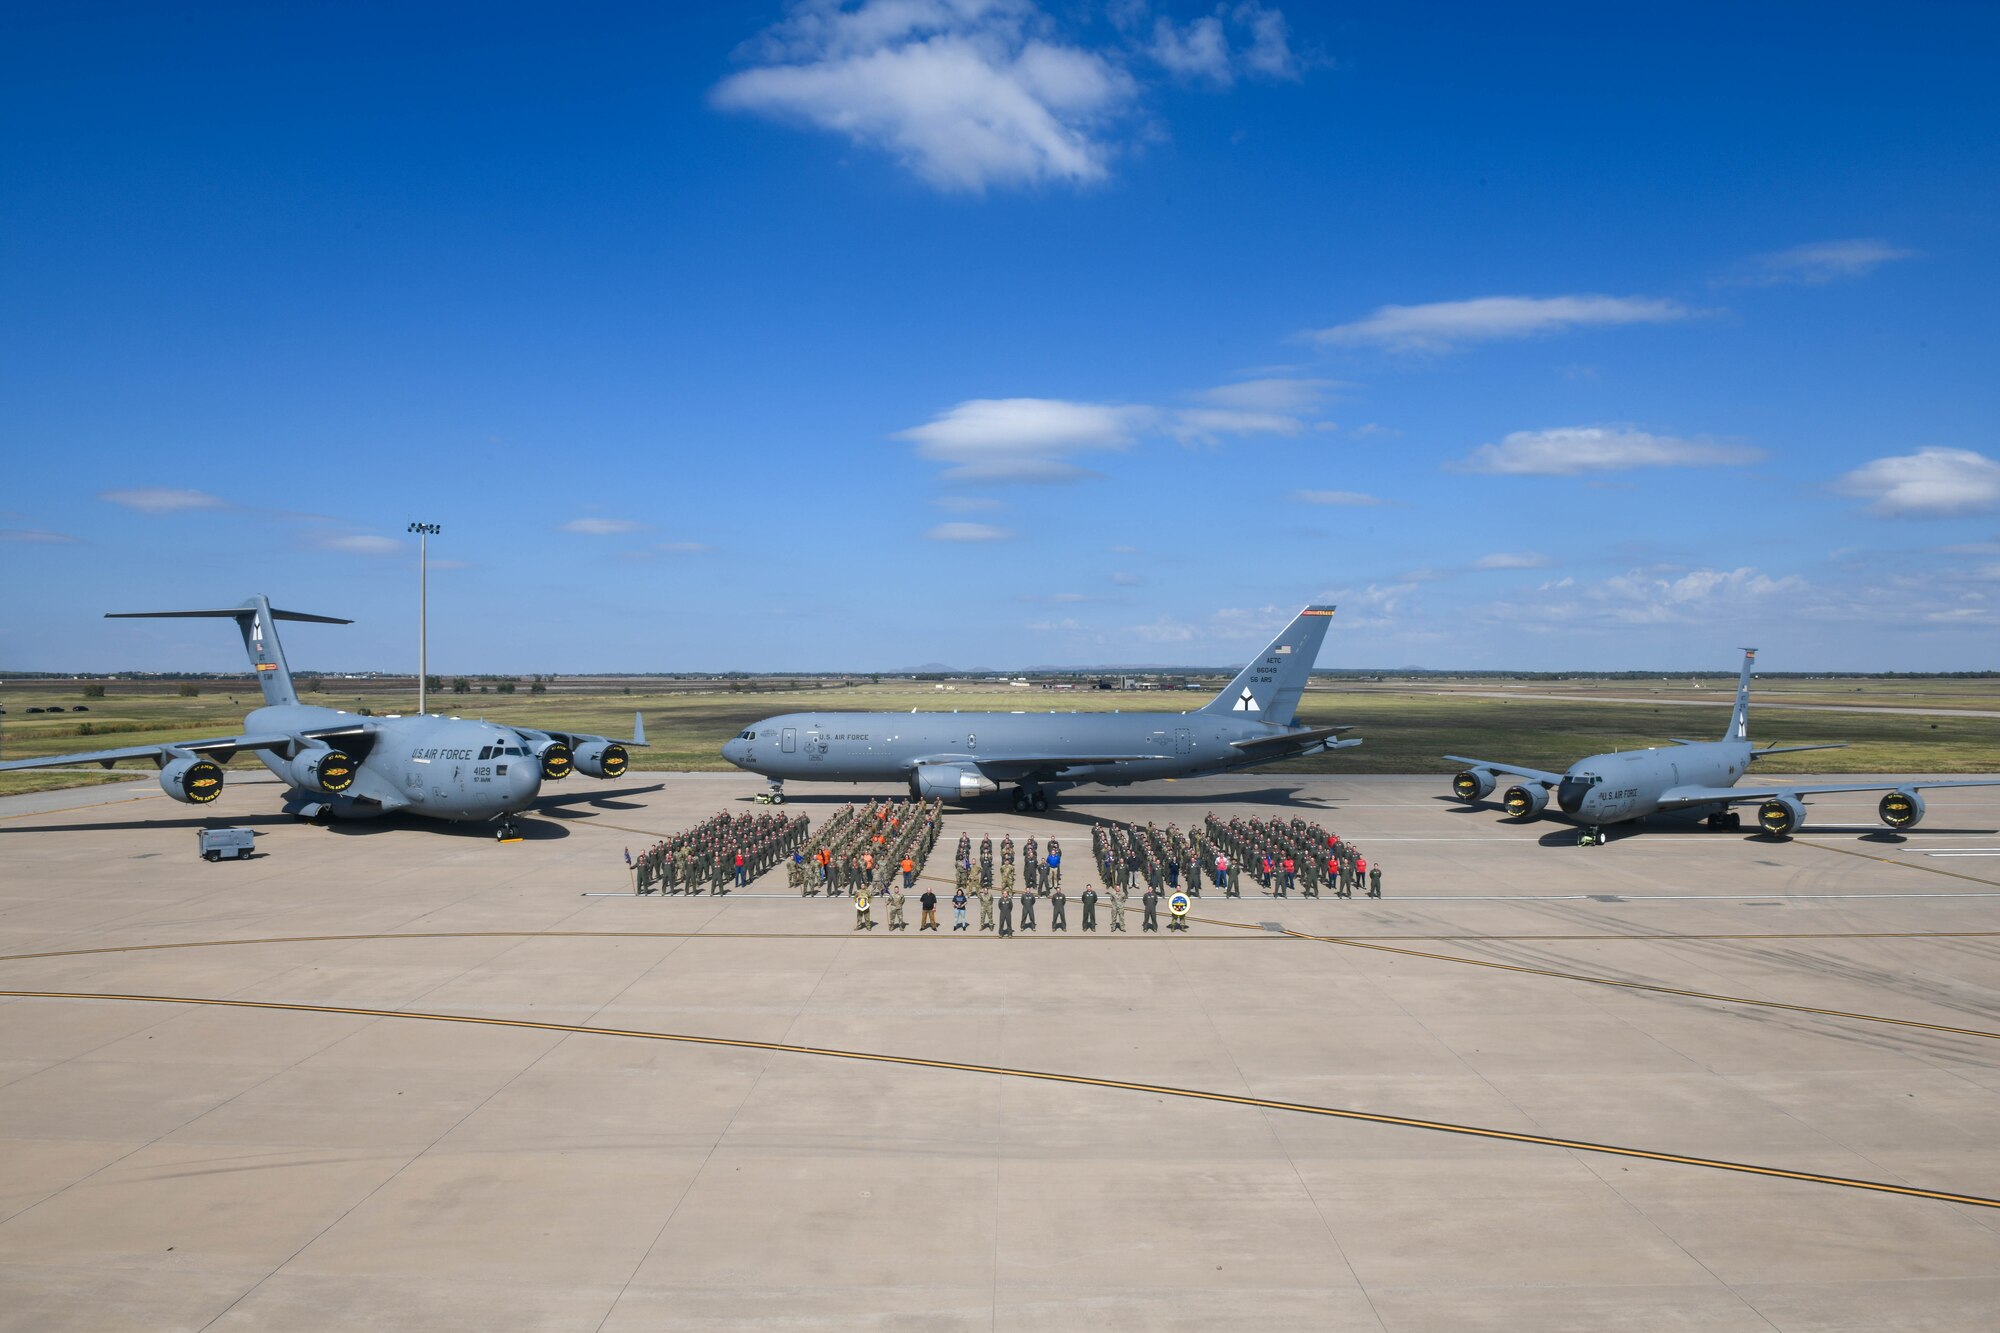 Members from the 97th Operations Group (OG) pose for a squadron photo October 22, 2021, at Altus Air Force Base, Oklahoma. Airmen from the OG won six Air Education and Training Command and Air Force-level awards in 2021. (U.S. Air Force photo by Airman 1st Class Trenton Jancze)